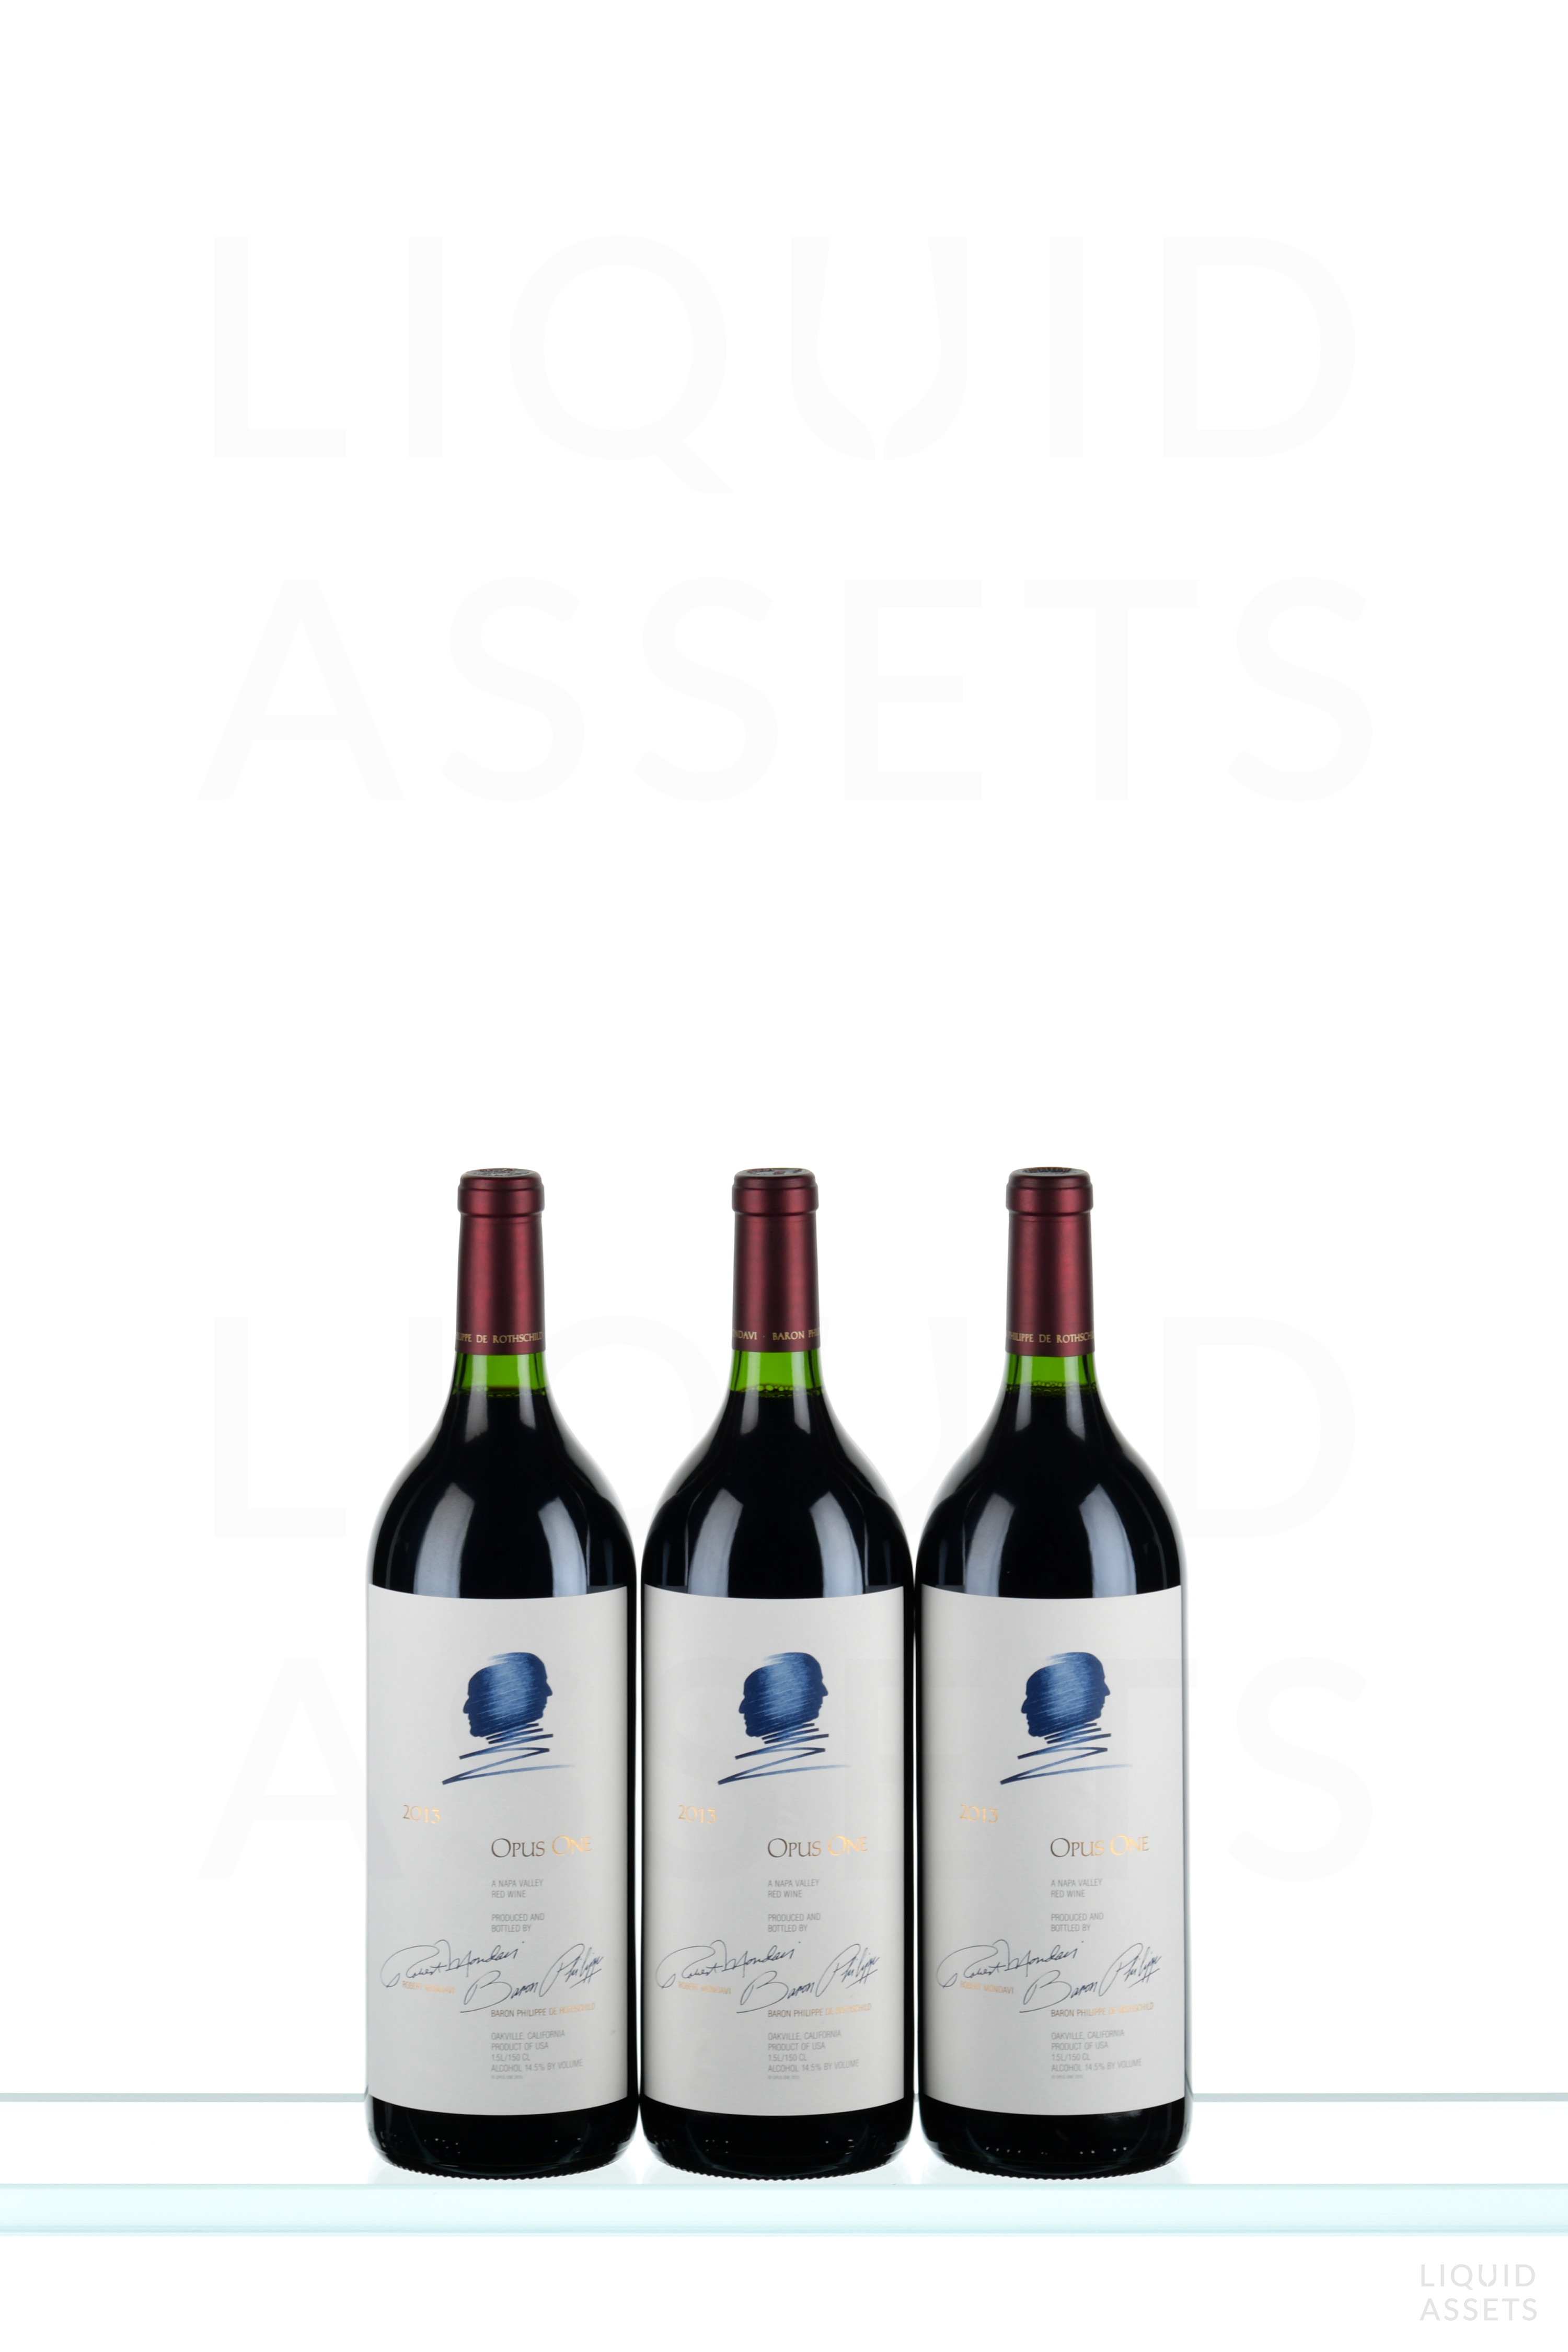 2006 opus one review